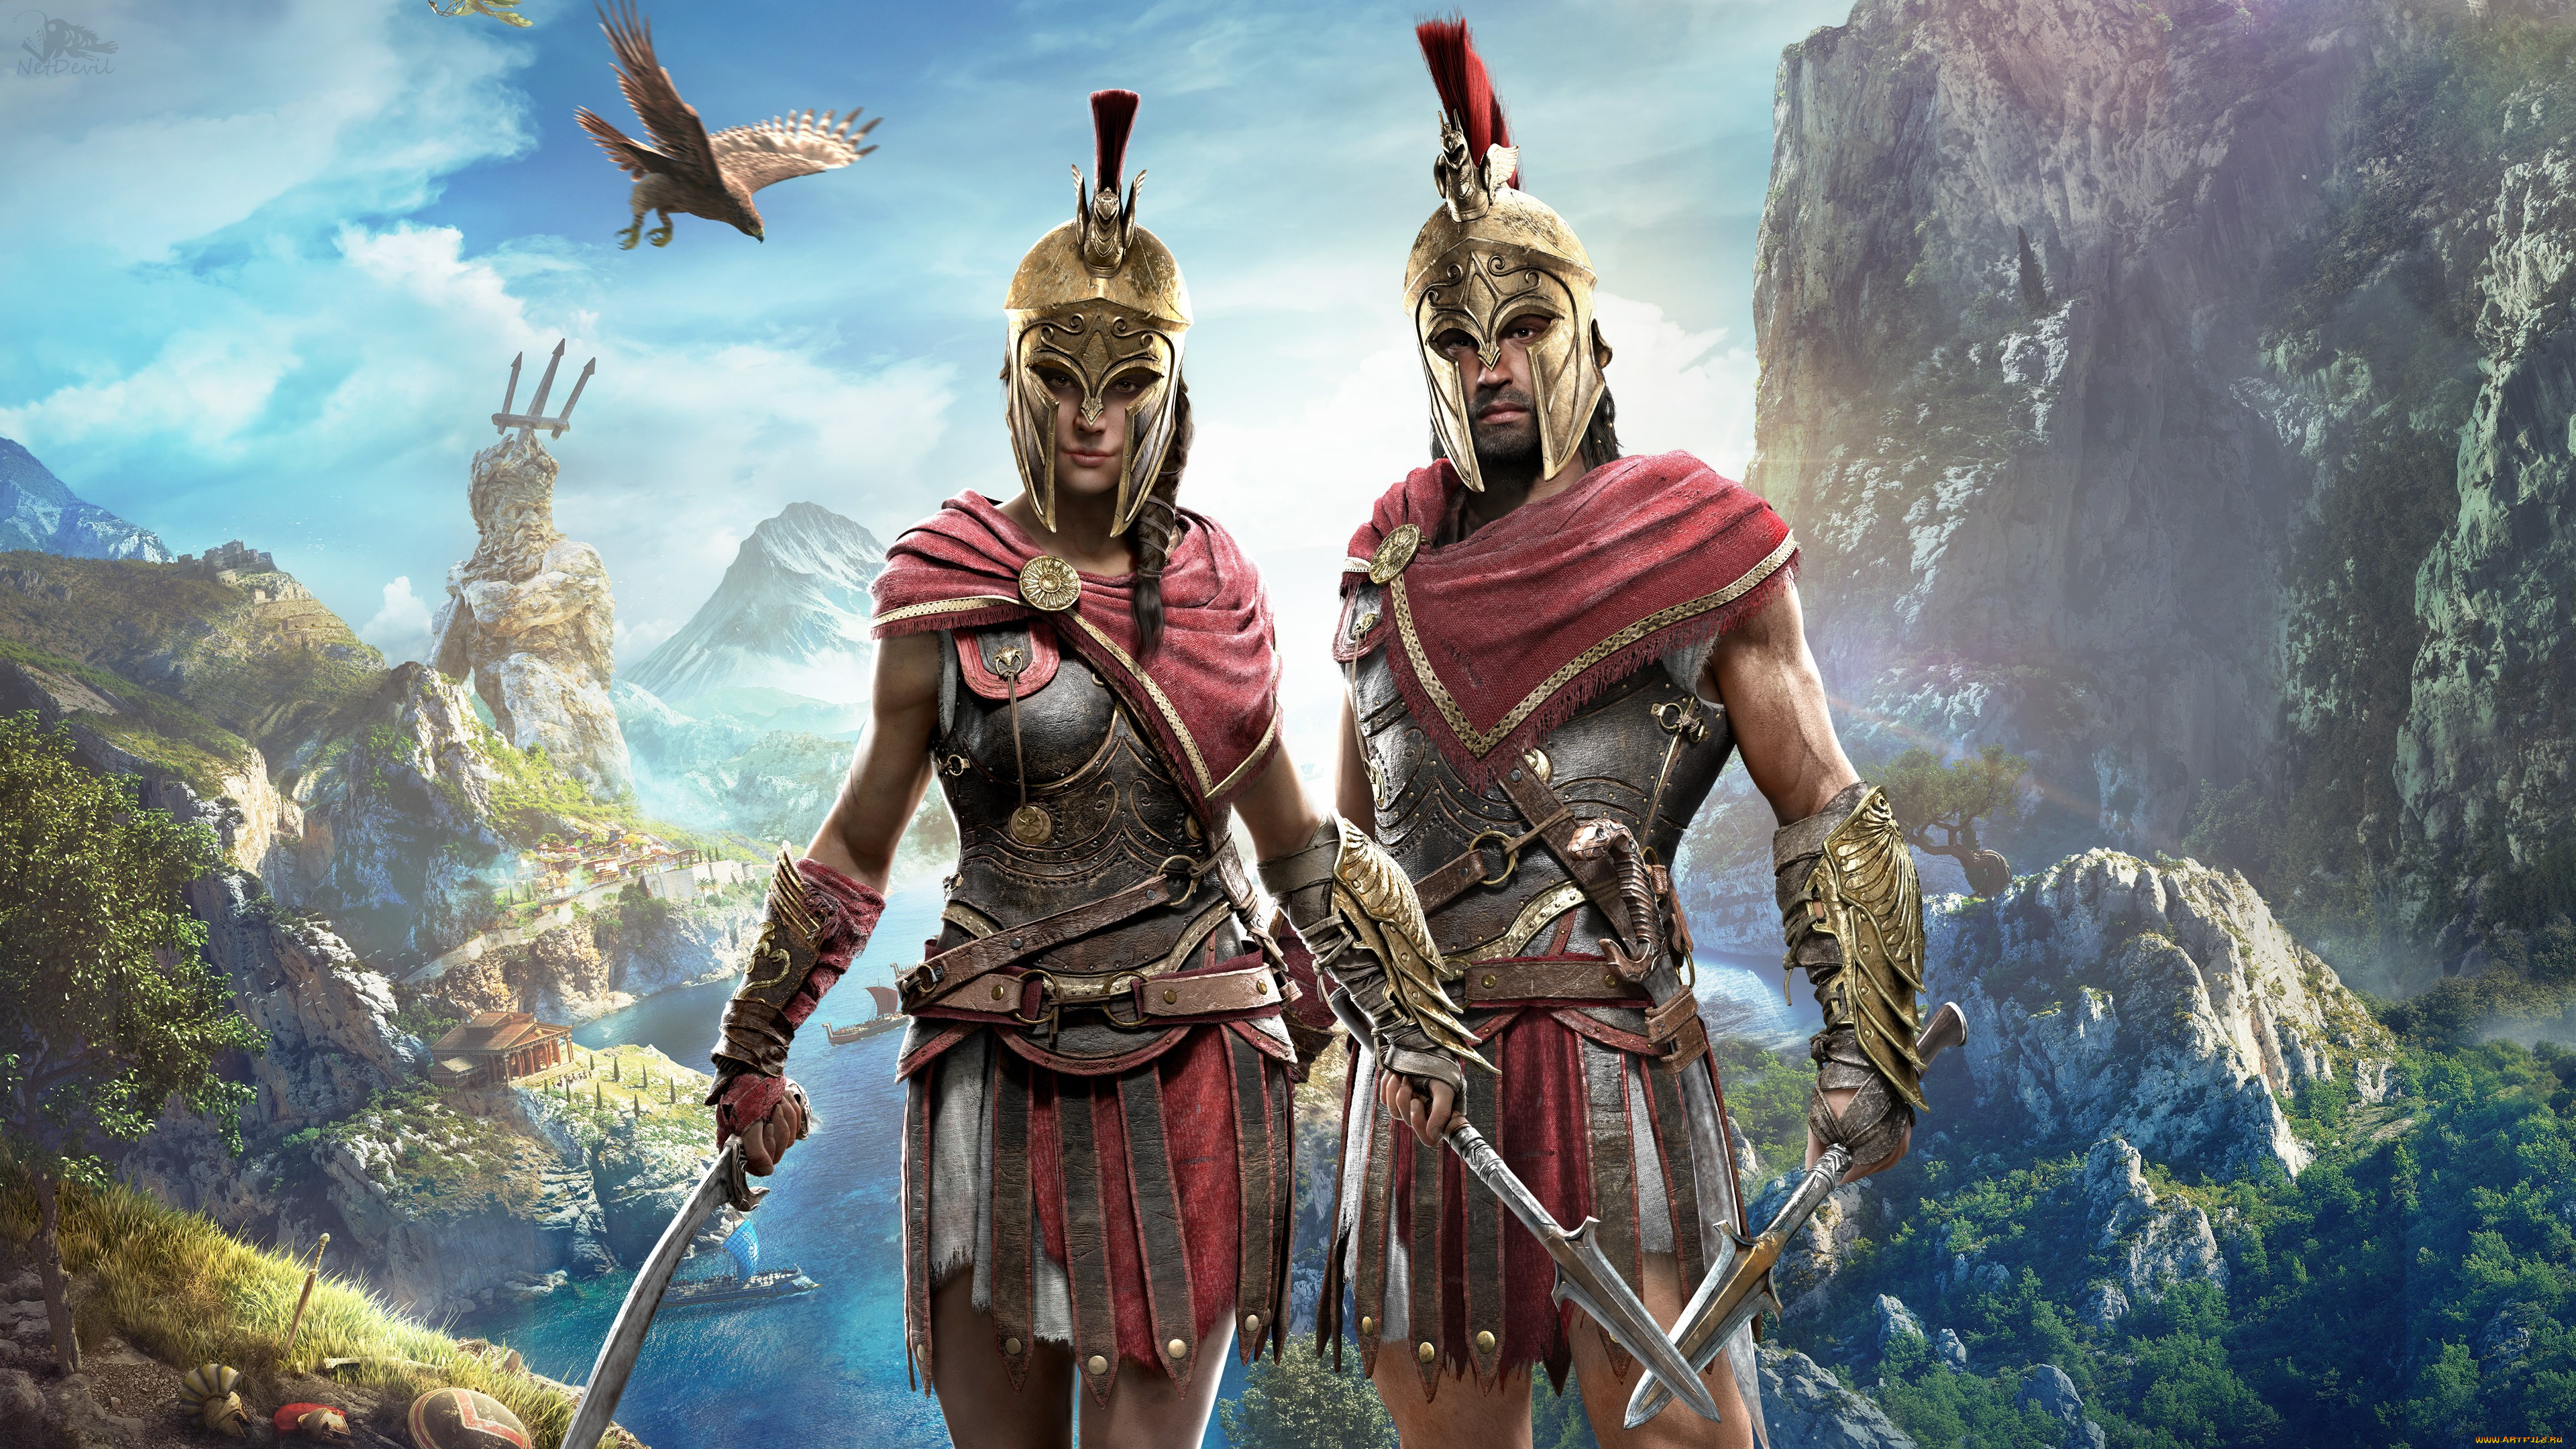  , assassins creed ,  odyssey, , , action, , odyssey, assassins, creed, 